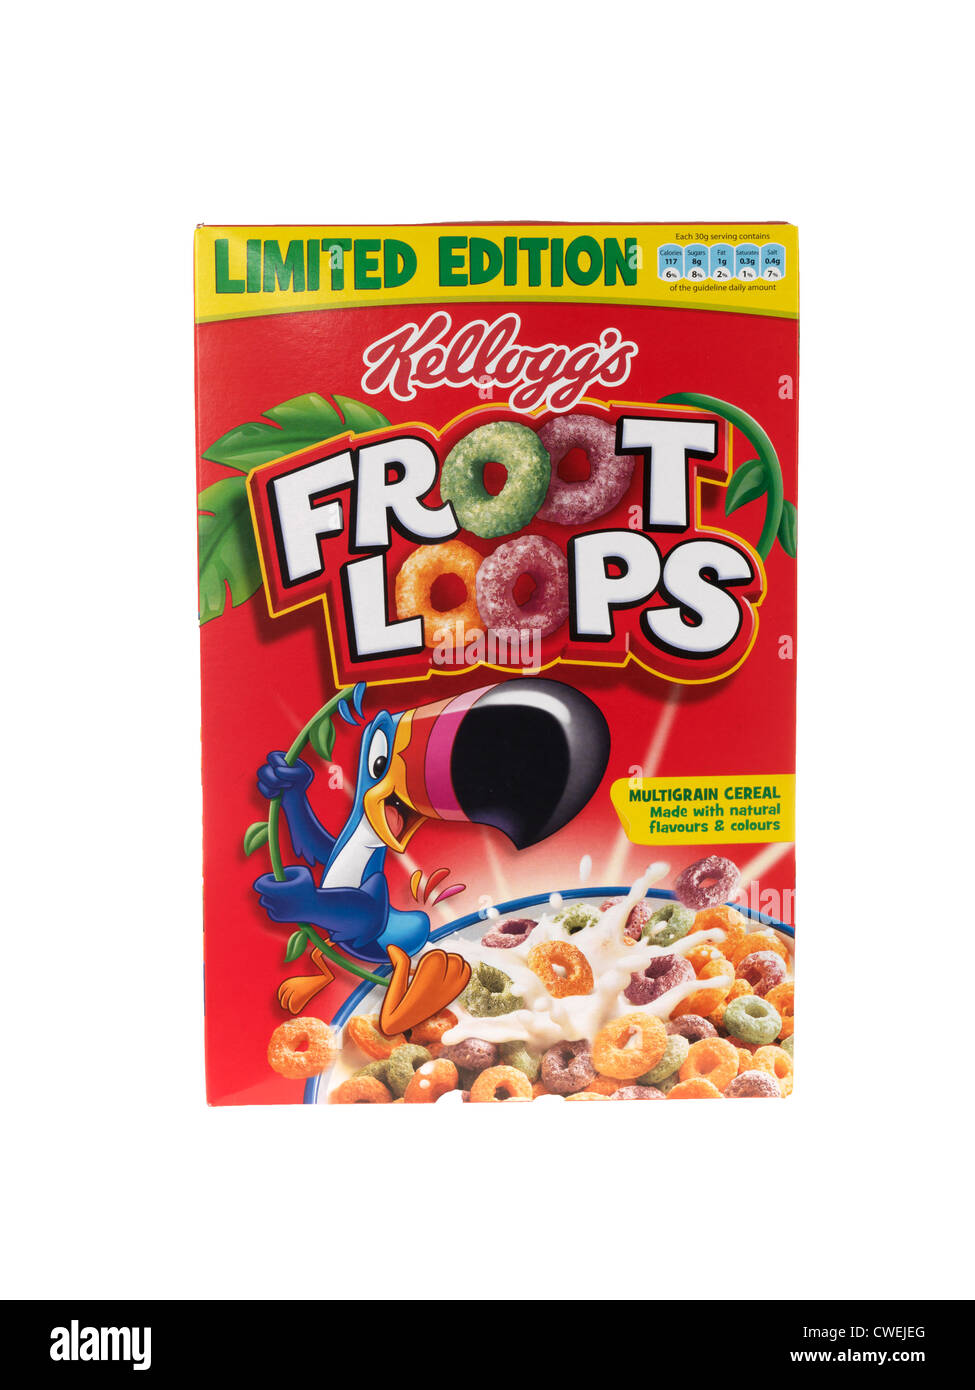 Cereal Kelloggs Froot Loops 270g